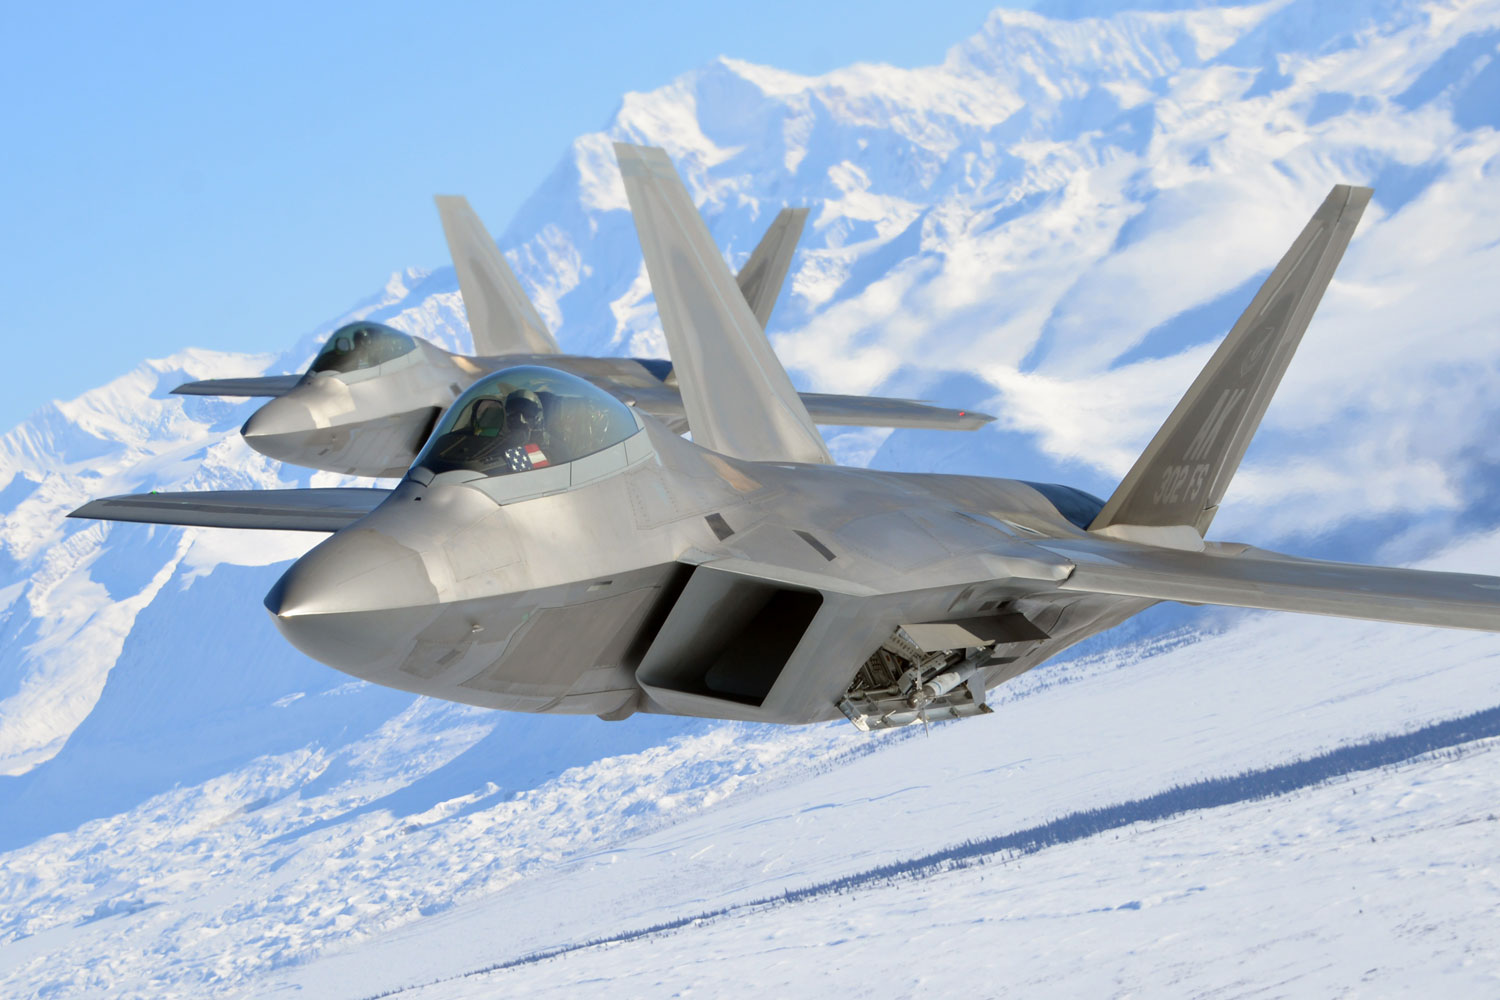 Us Air Force Is Deploying 12 F-22 Raptor Fighter Jets To Poland - Air Data  News